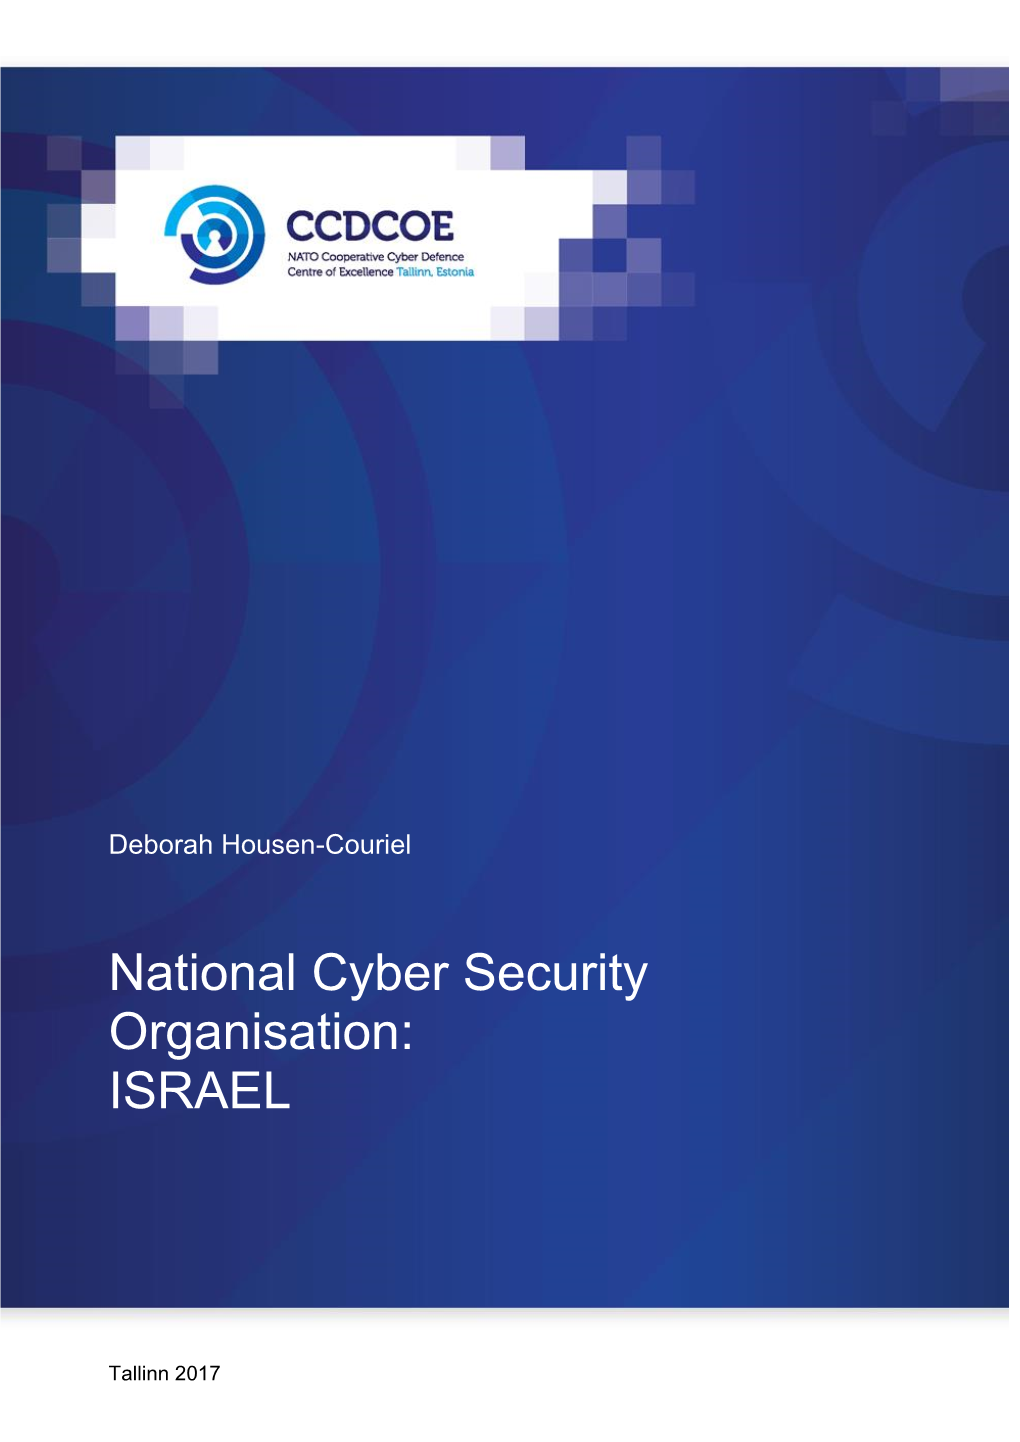 National Cyber Security Organisation: ISRAEL